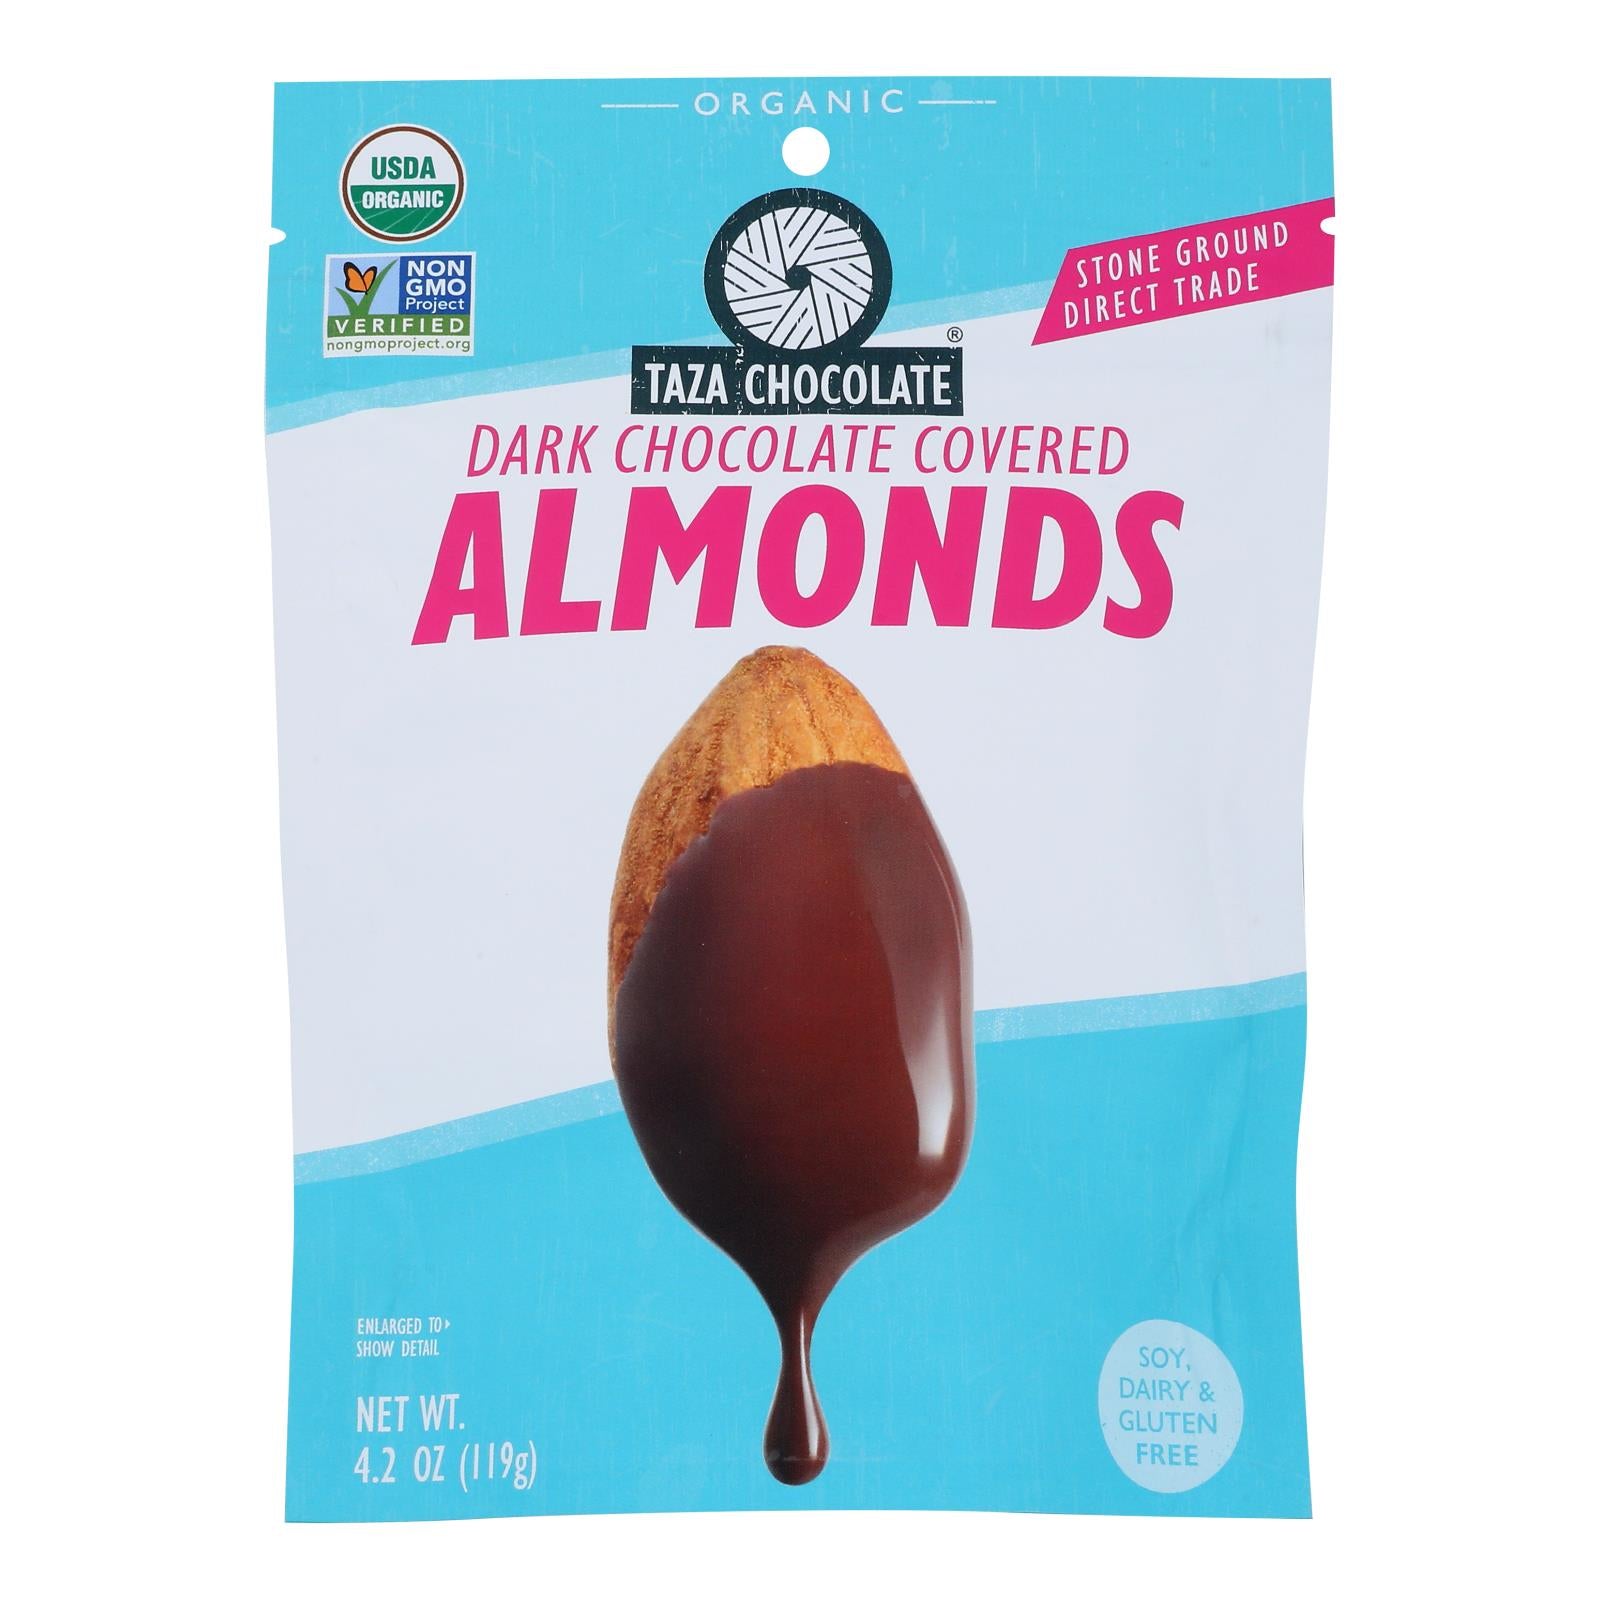 Taza Chocolate - Almonds Chocolate Covered - Case of 12-3.5 OZ